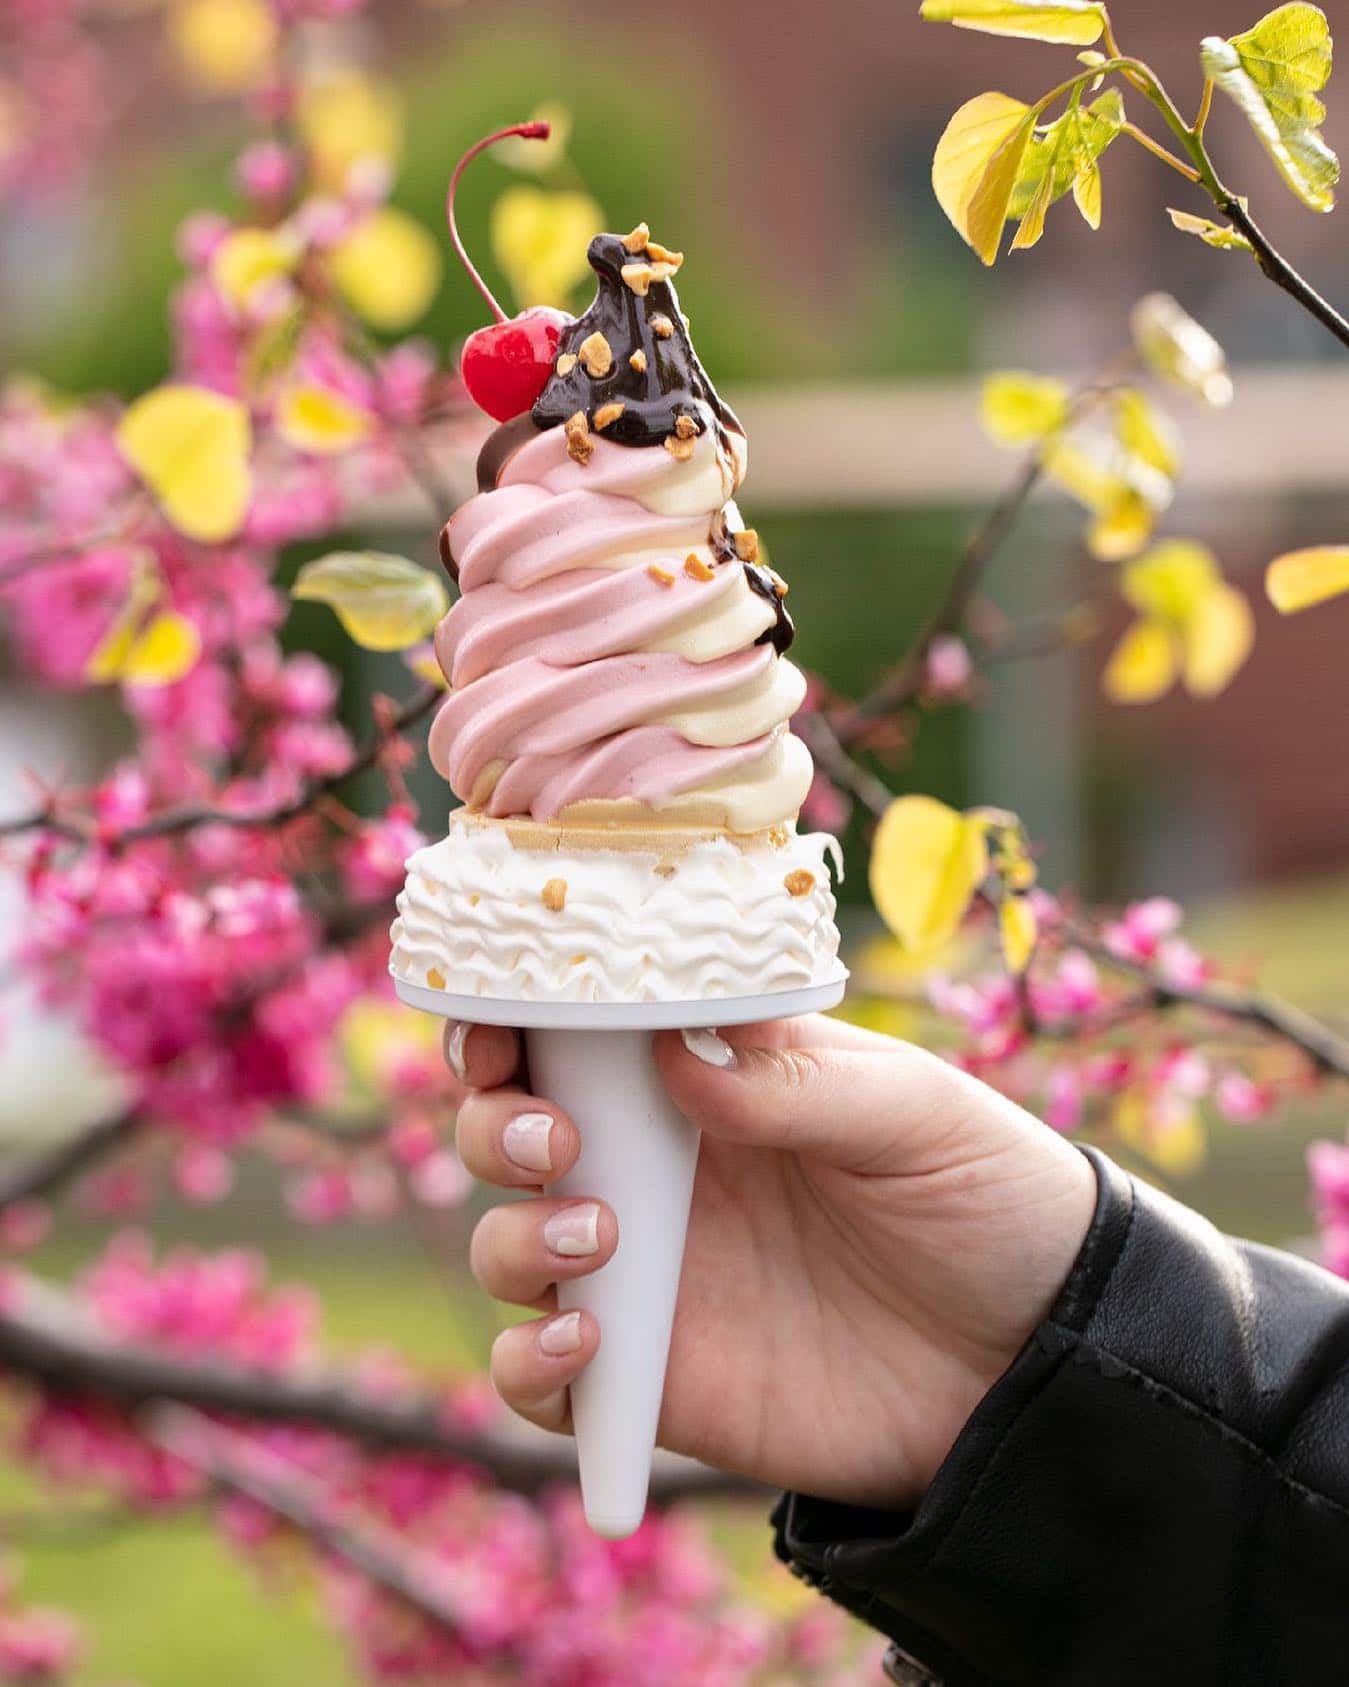 Lickety Split. This month’s must-have soft serve. See for yourself @eatmisterdips #TheSeaport